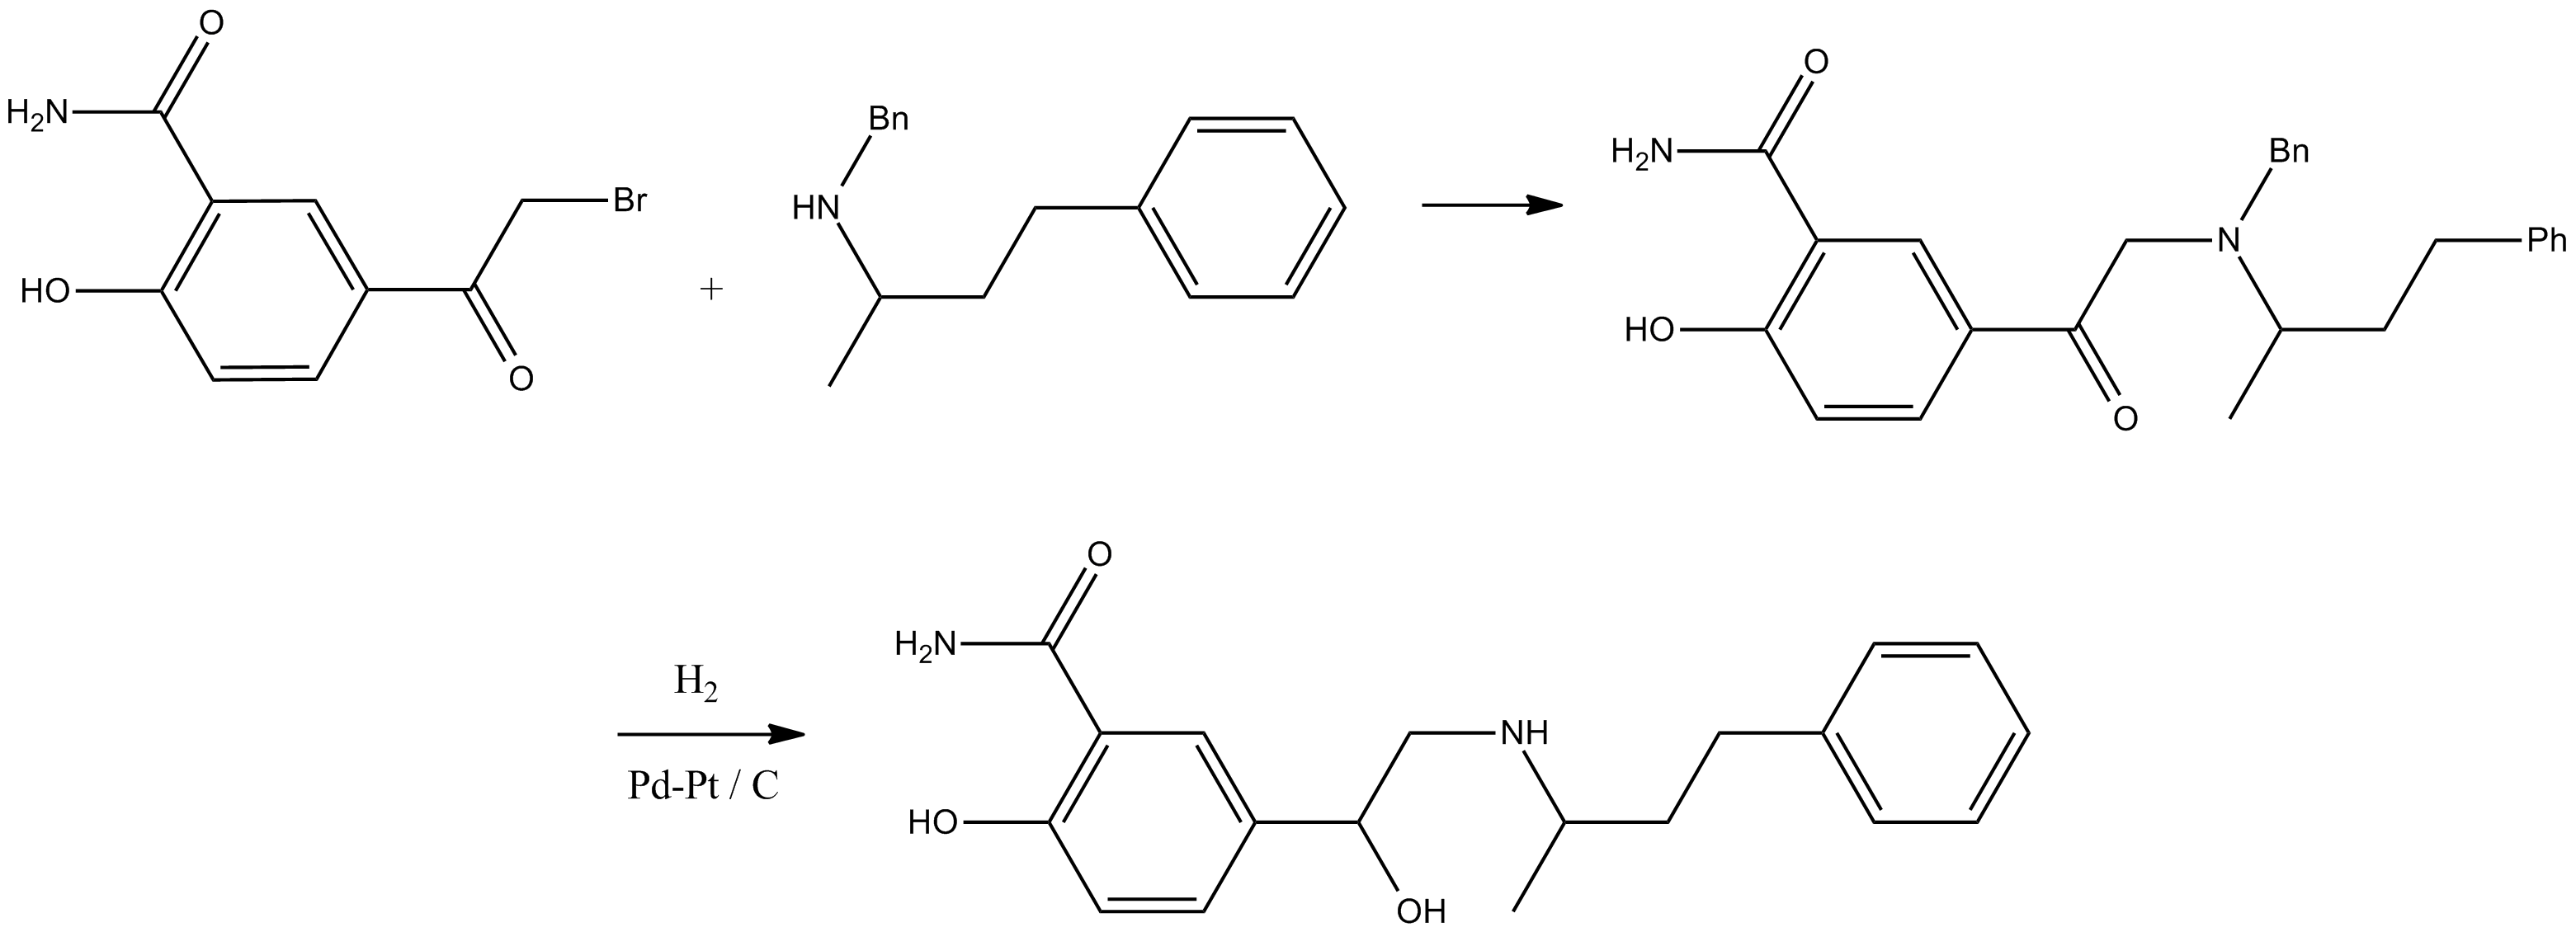 File:Kevlar chemical synthesi